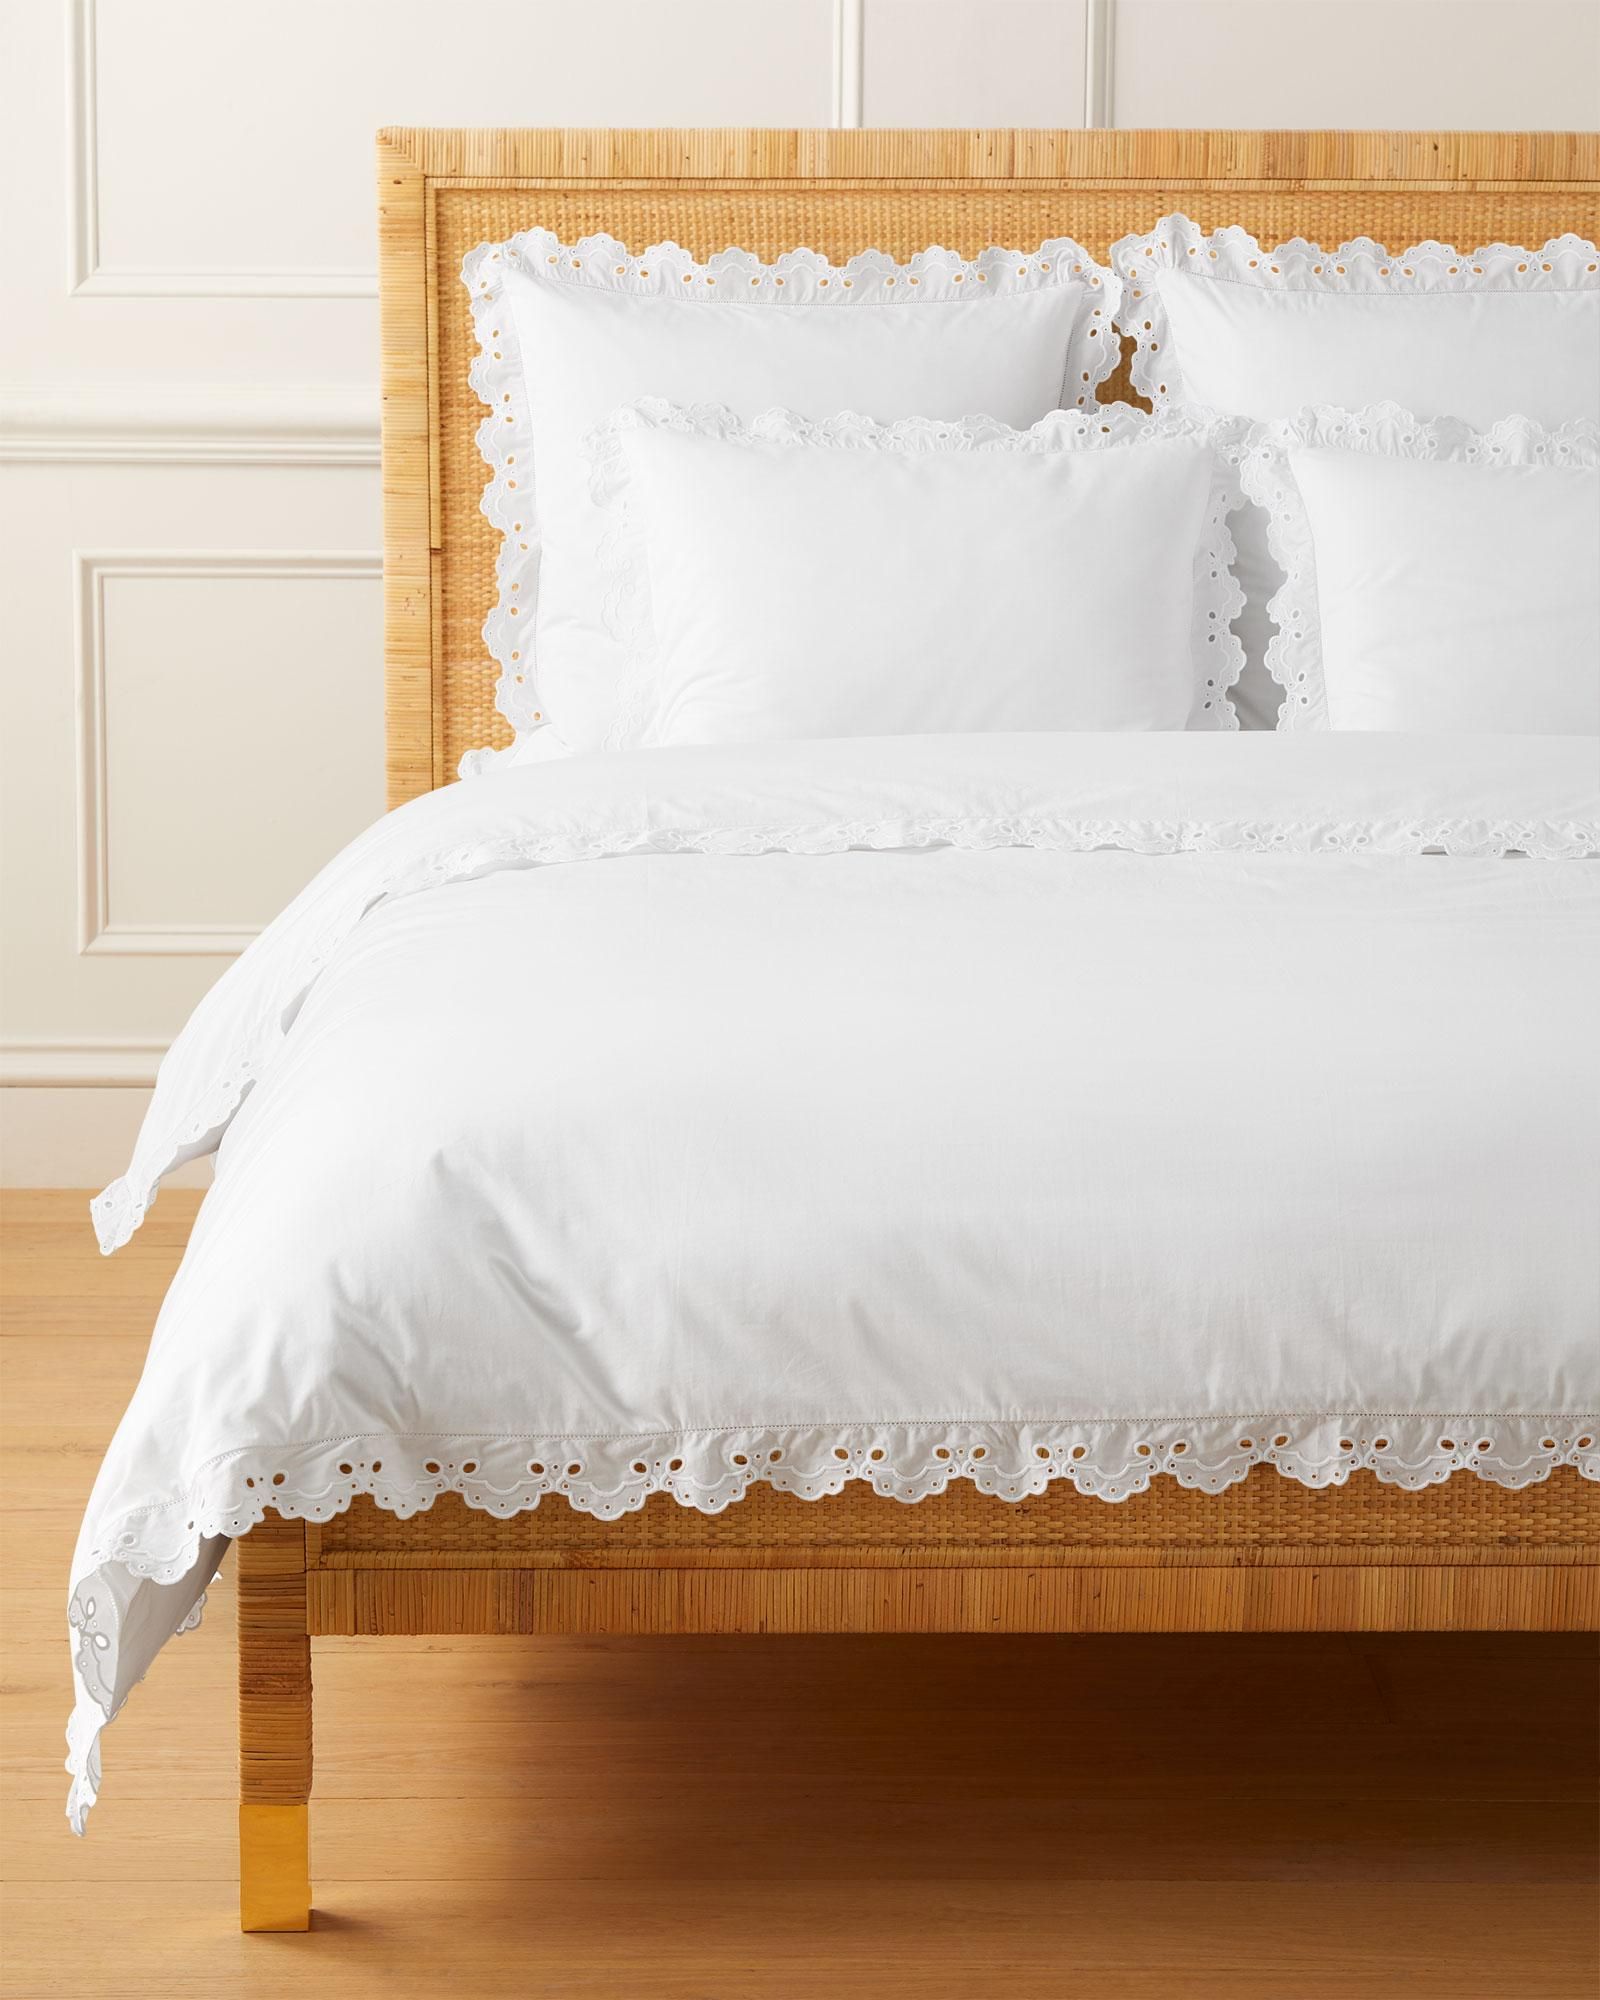 Antibes Eyelet Percale Bedding Set | Serena and Lily